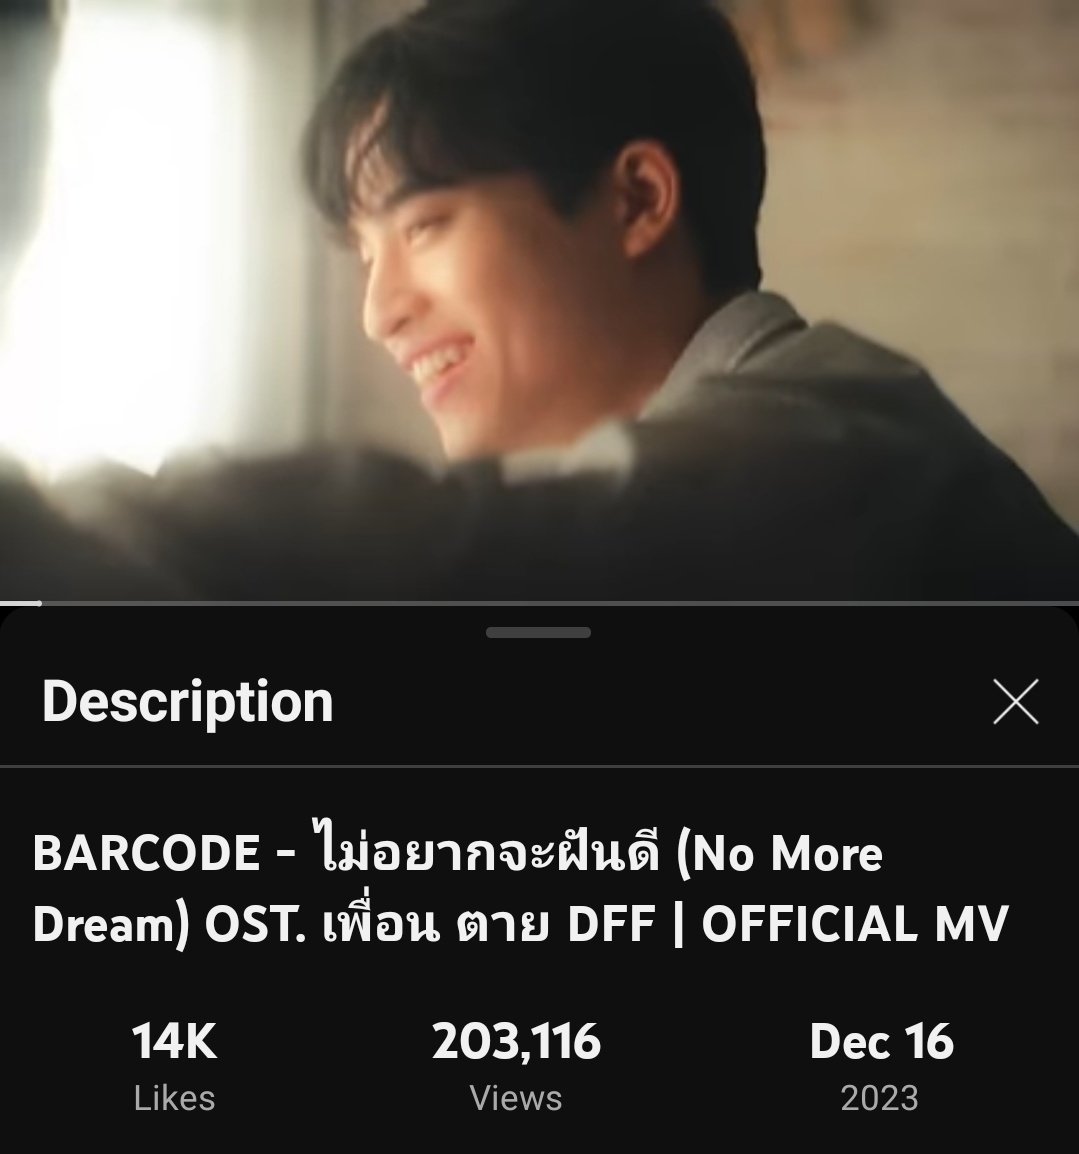 Your sweet smile and beautiful eyes always captivates me....

🎵NMD Streaming Party🎵

#StreamBarcodeNMD
#barcodetin #Unit
@BarcodeTin